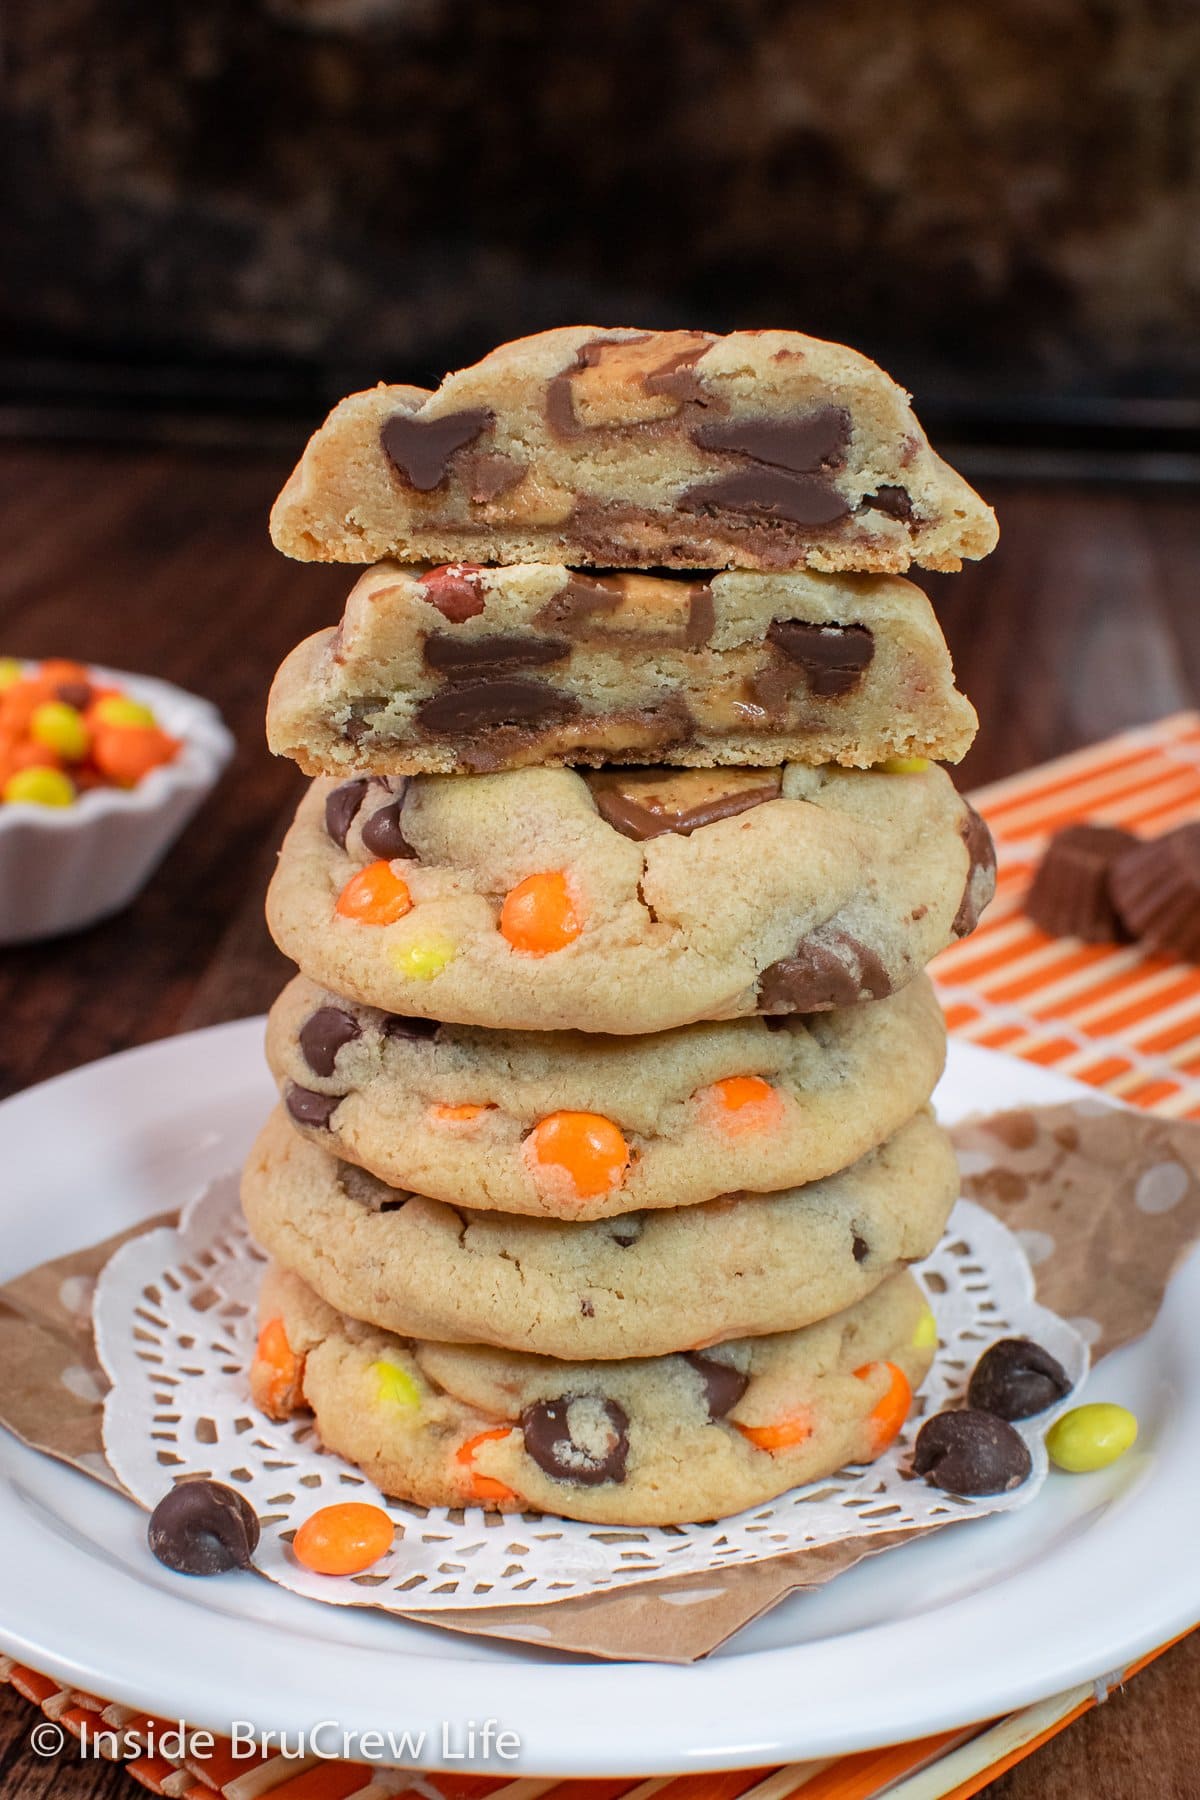 A tall stack of peanut butter cookies loaded with Reese's candies.